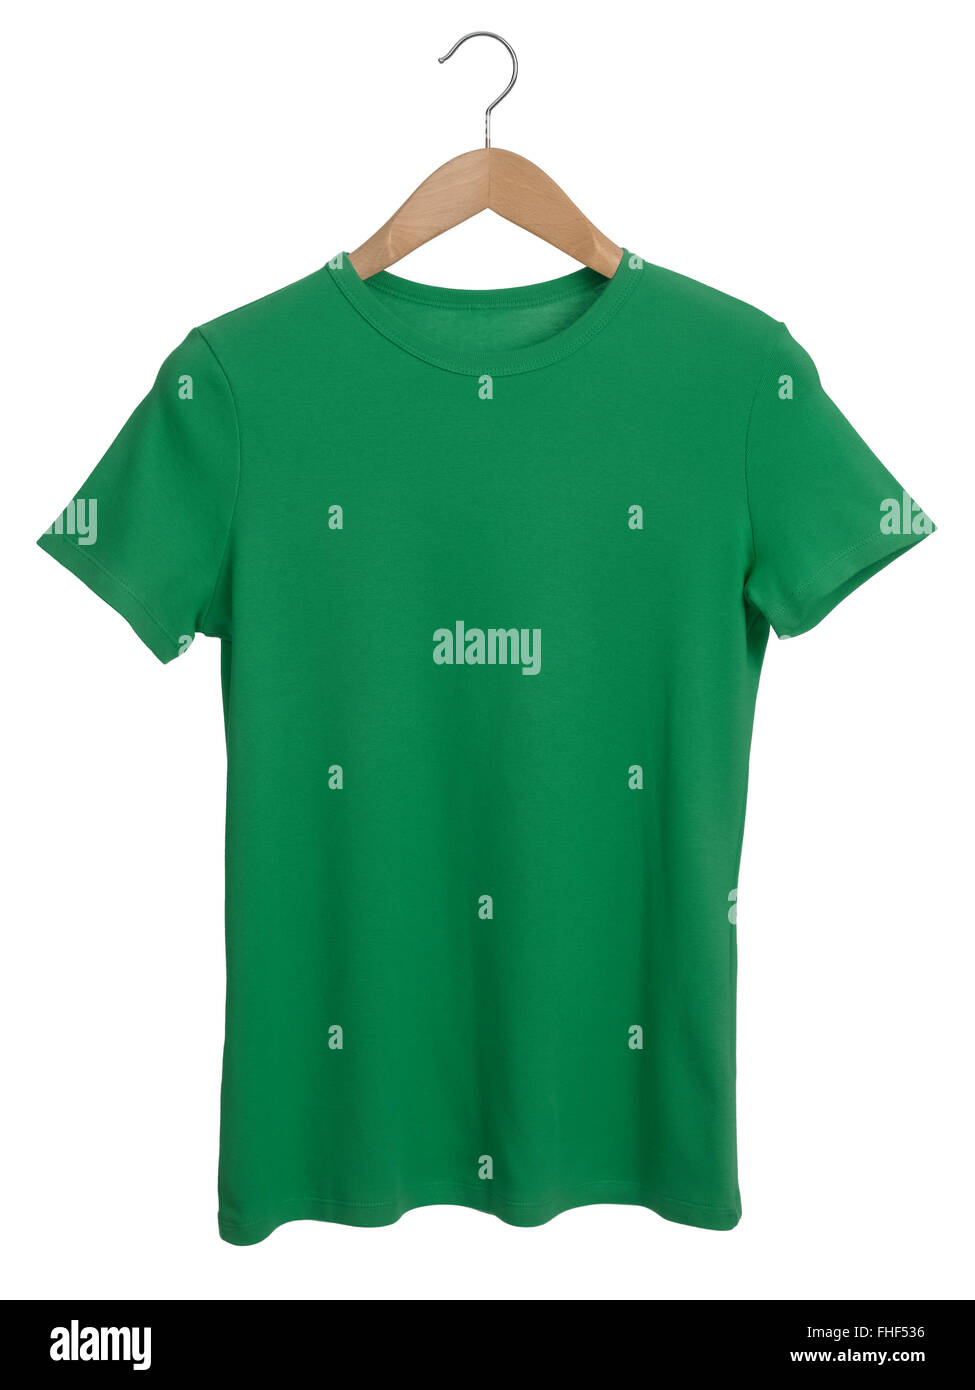 https://c8.alamy.com/comp/FHF536/isolated-green-t-shirt-on-a-hanger-FHF536.jpg